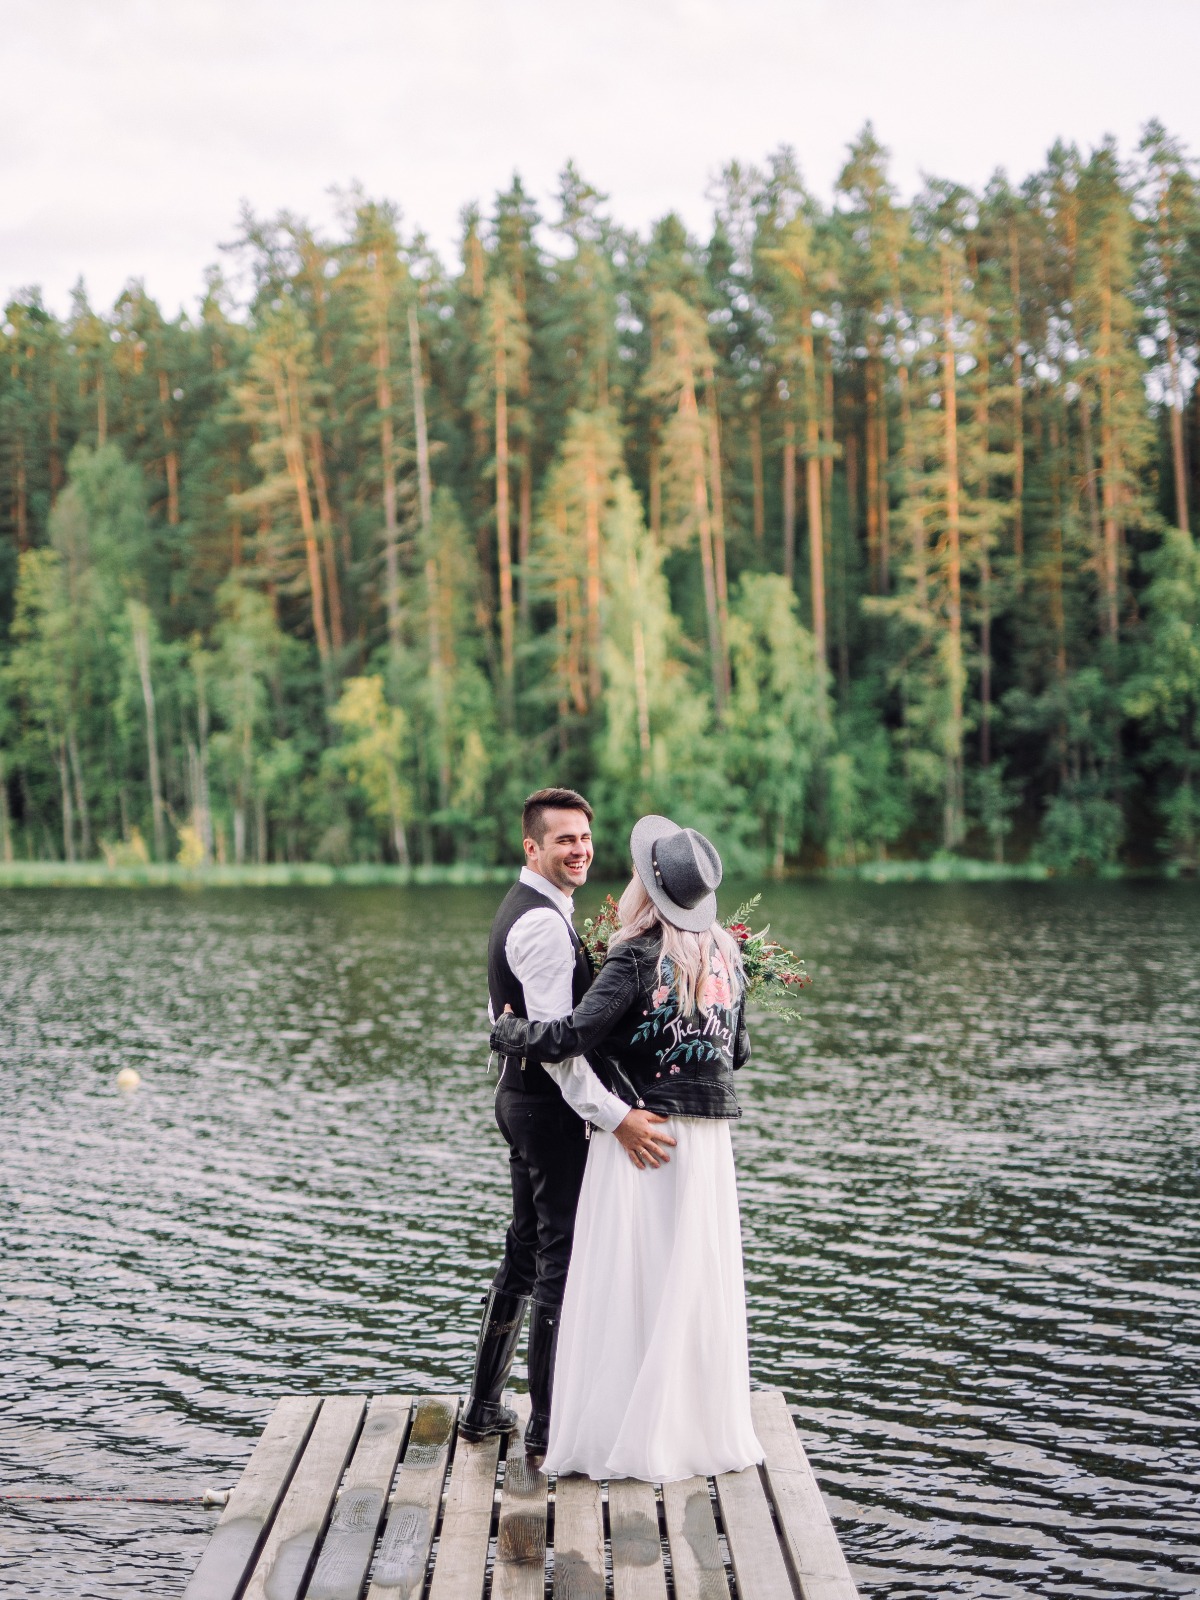 wedding couple in the forest